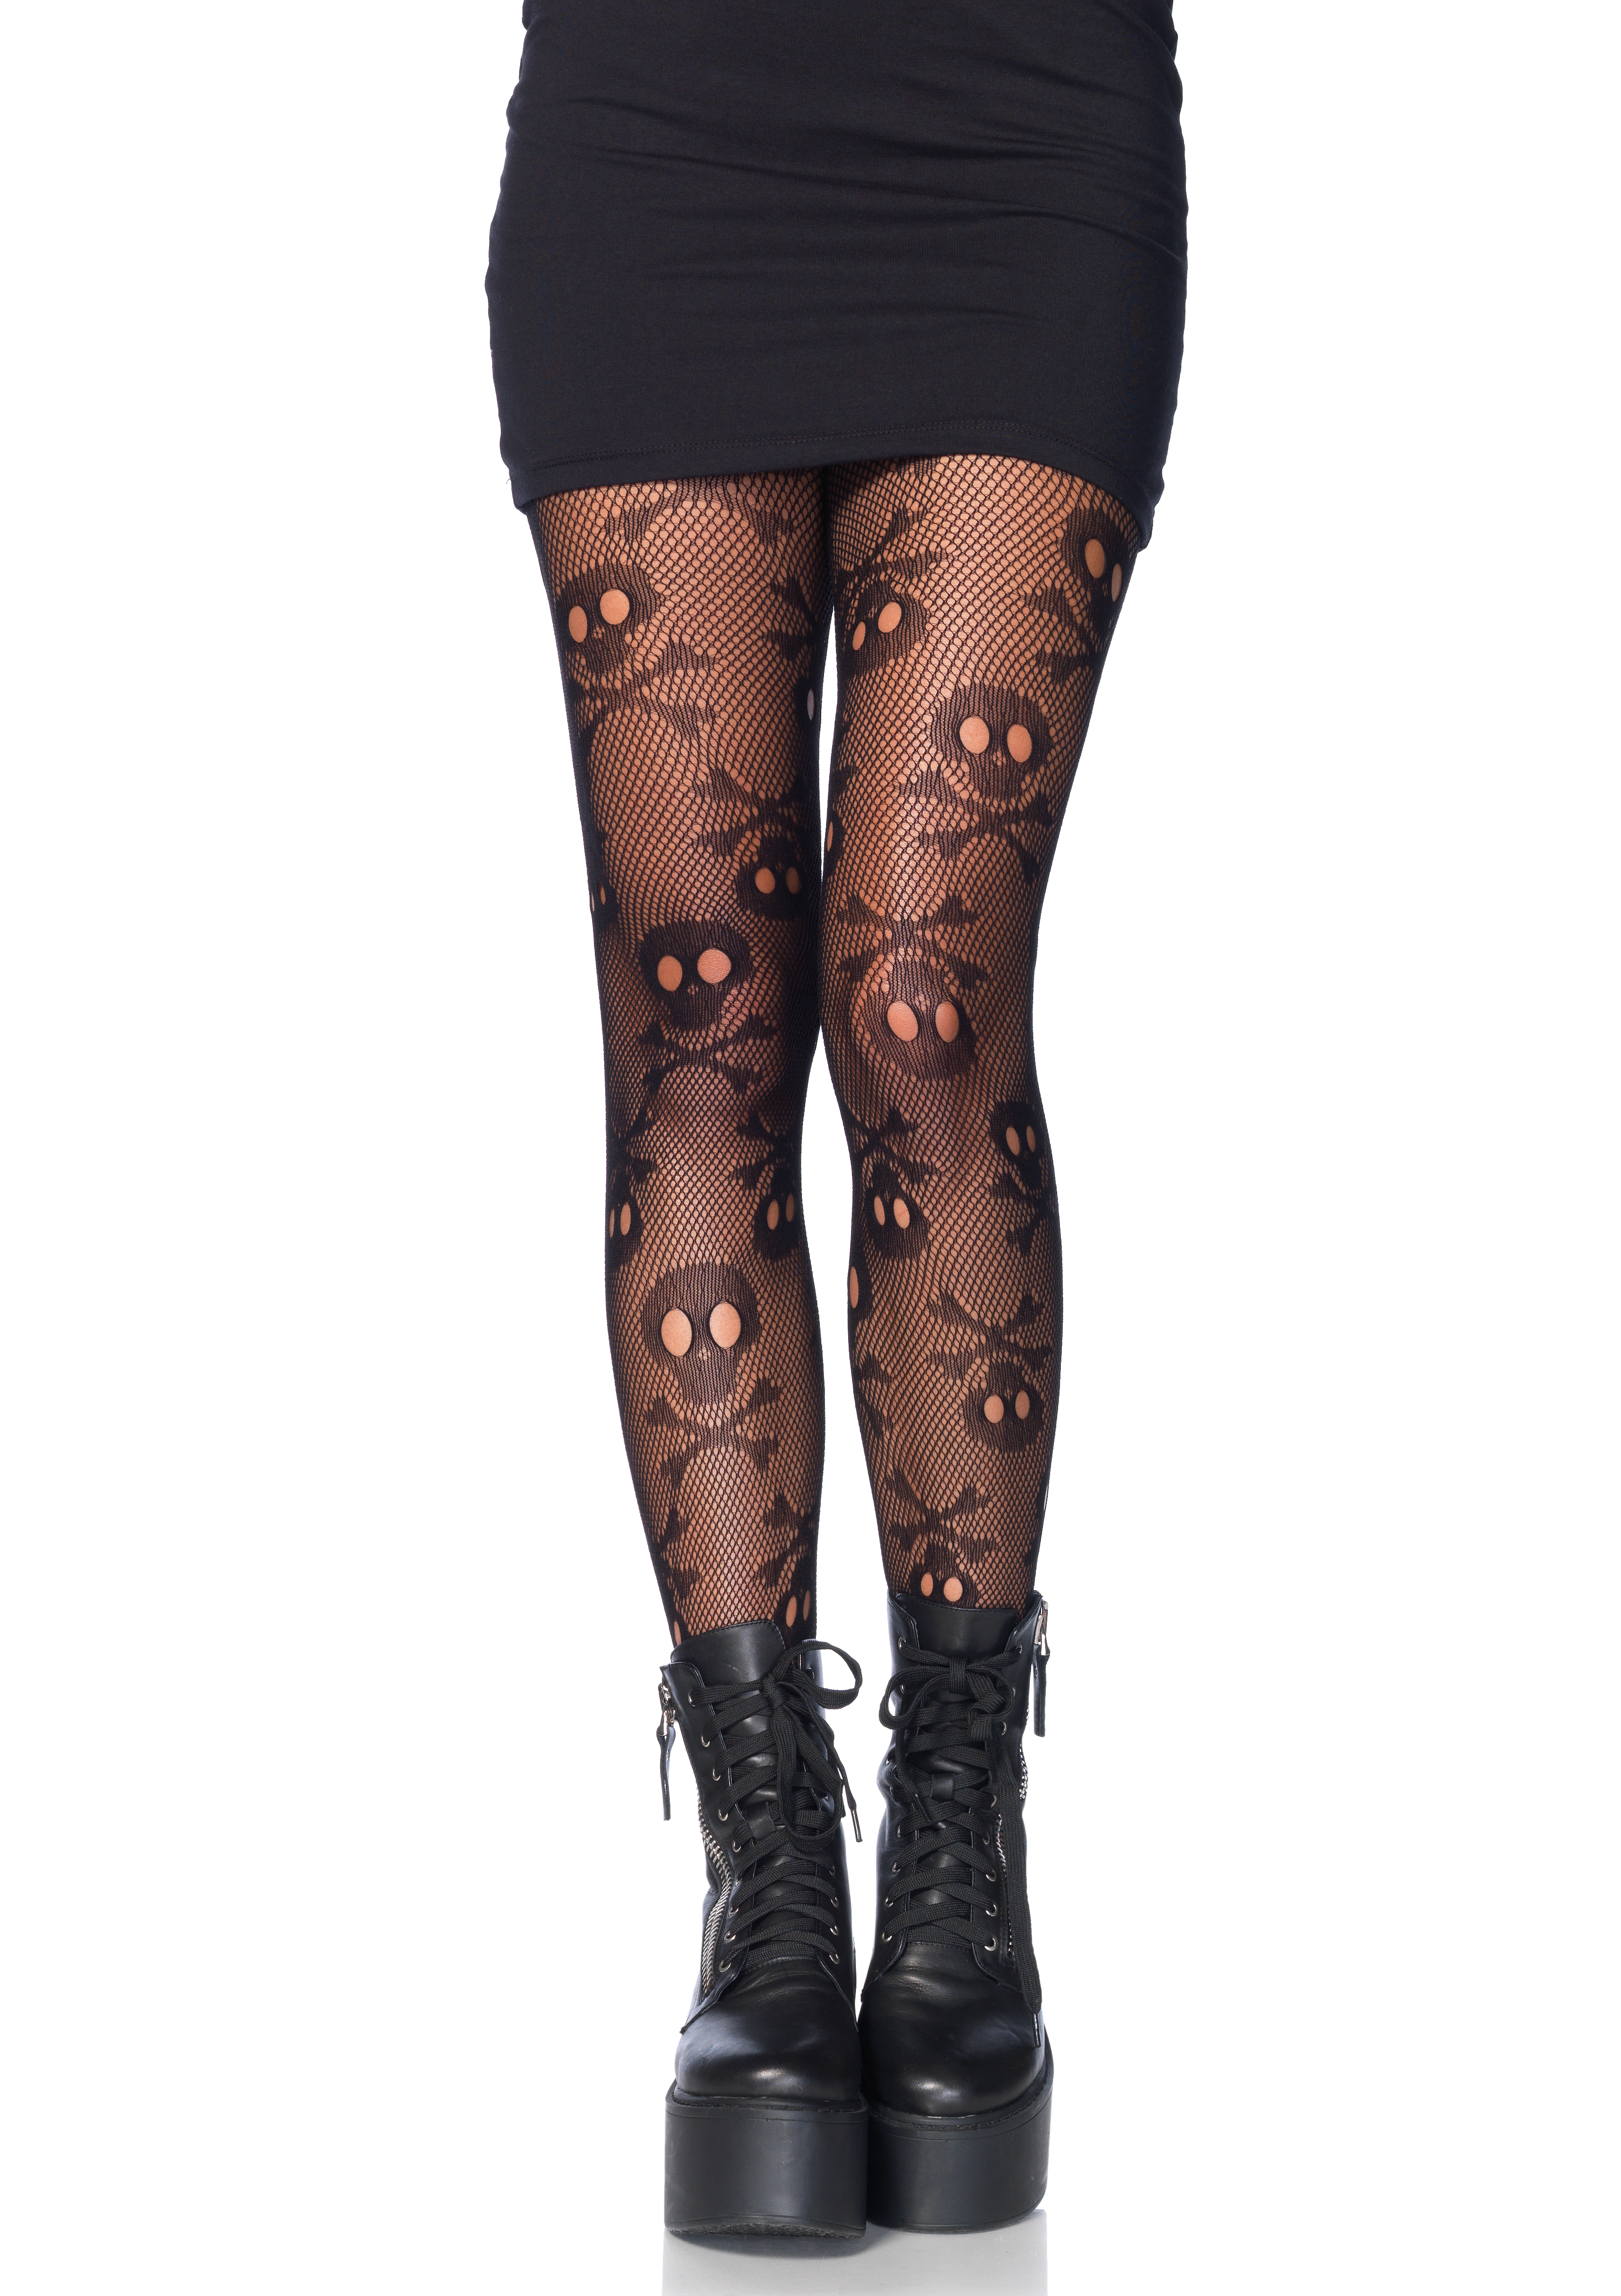 Pirate Booty Skull Net Pantyhose - One Size